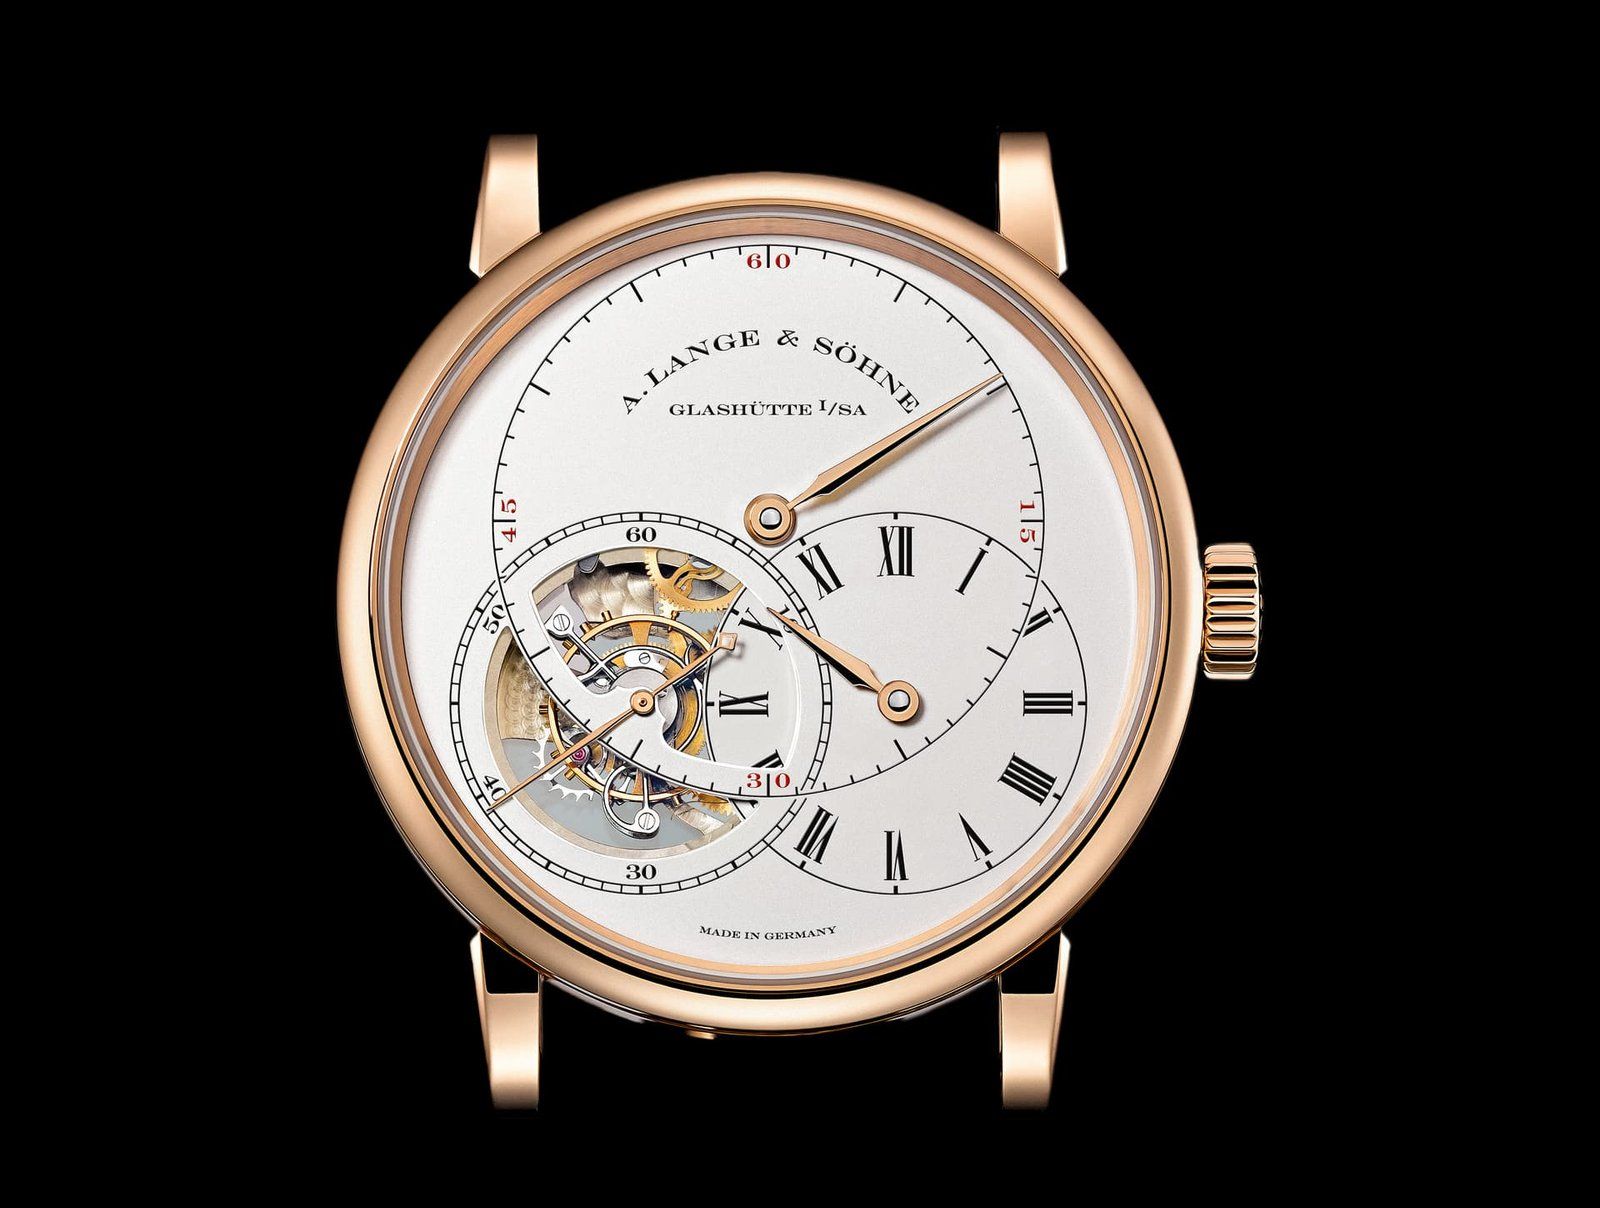 The Richard Lange offers a blend of the highest precision and best possible legibility